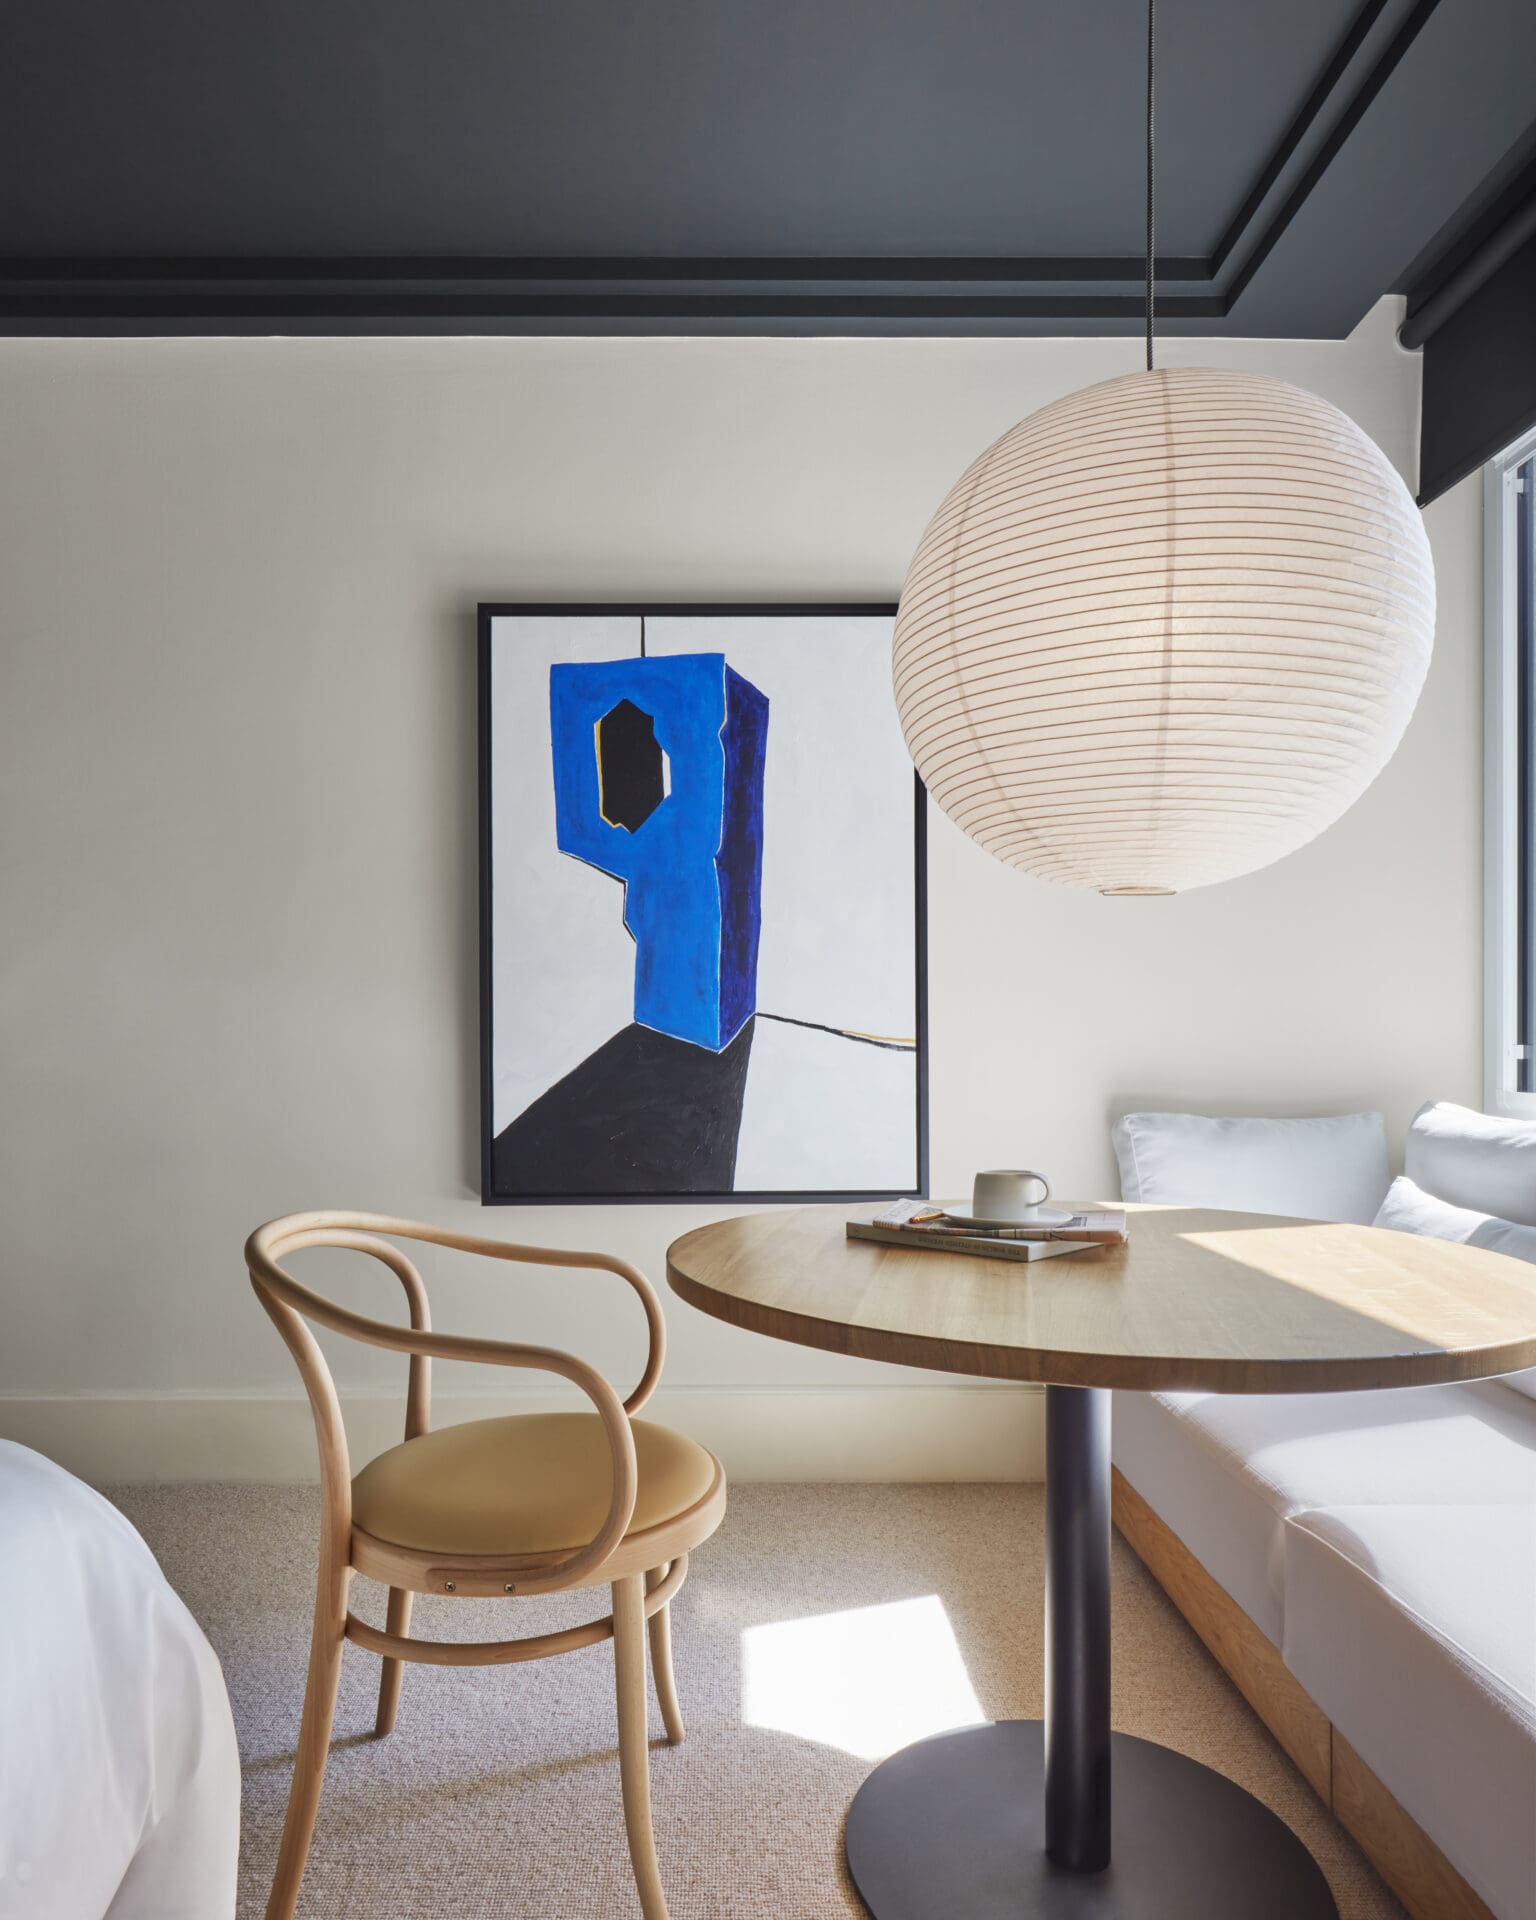 Best hotels in Shoreditch, Dalston and Hackney | A view of a bedroom in One Hundred Shoreditch. A paper light lantern hangs from the ceiling over a round table, where a wooden cane seat and a sofa can be seen. A painting hangs on the wall. The ceiling is painted in a dark grey, and the walls a light neutral shade.